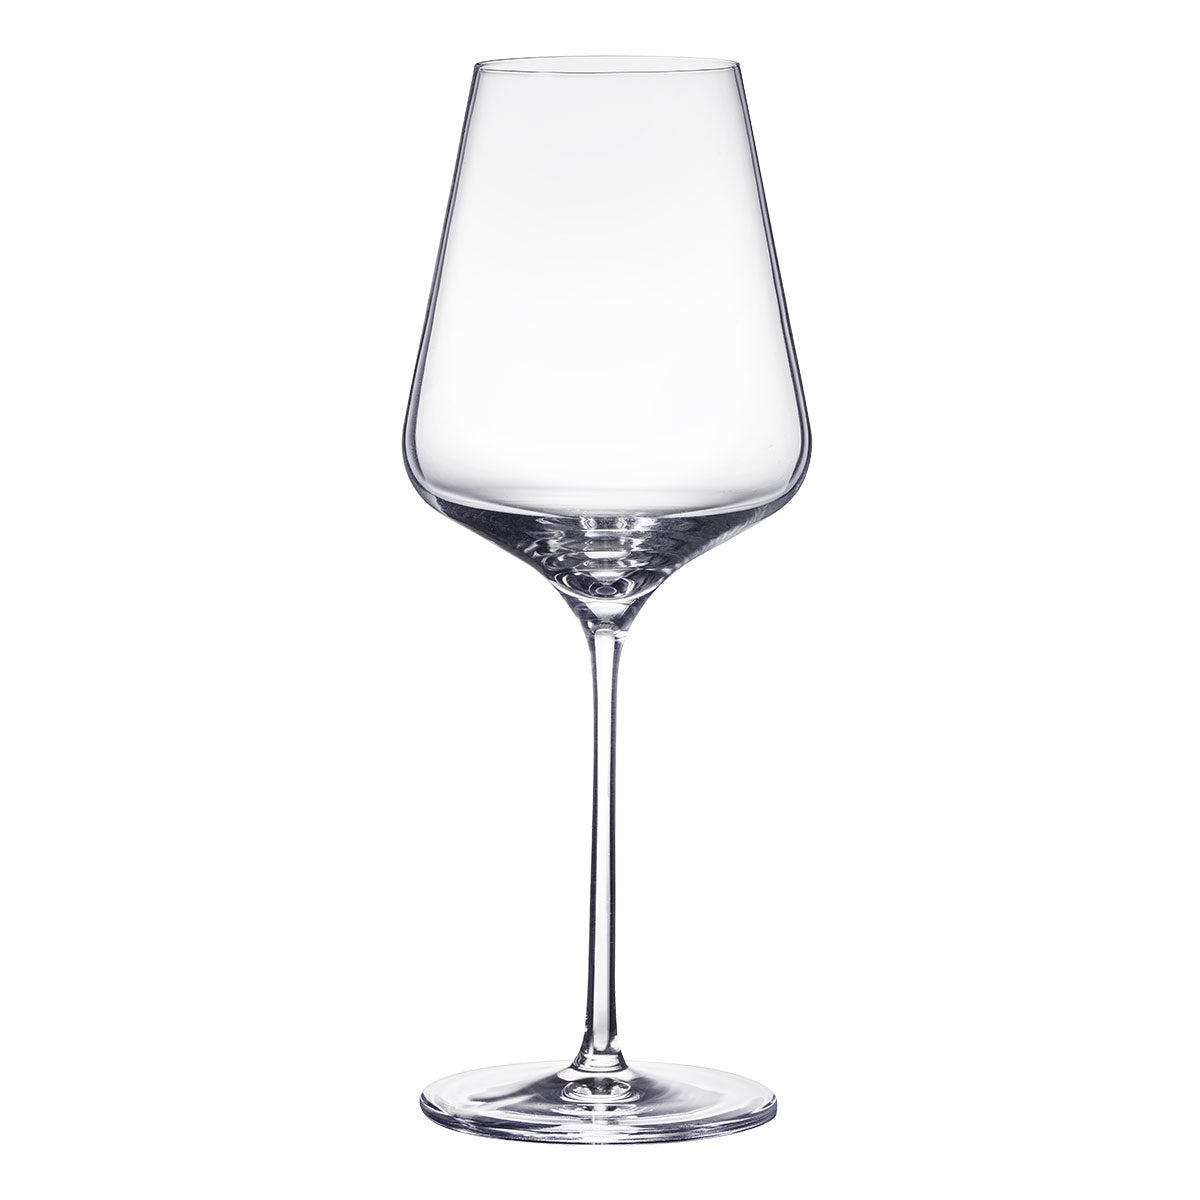 Coccot Wine Glasses Set of 6,Crystal White Wine Glasses,Red Wine